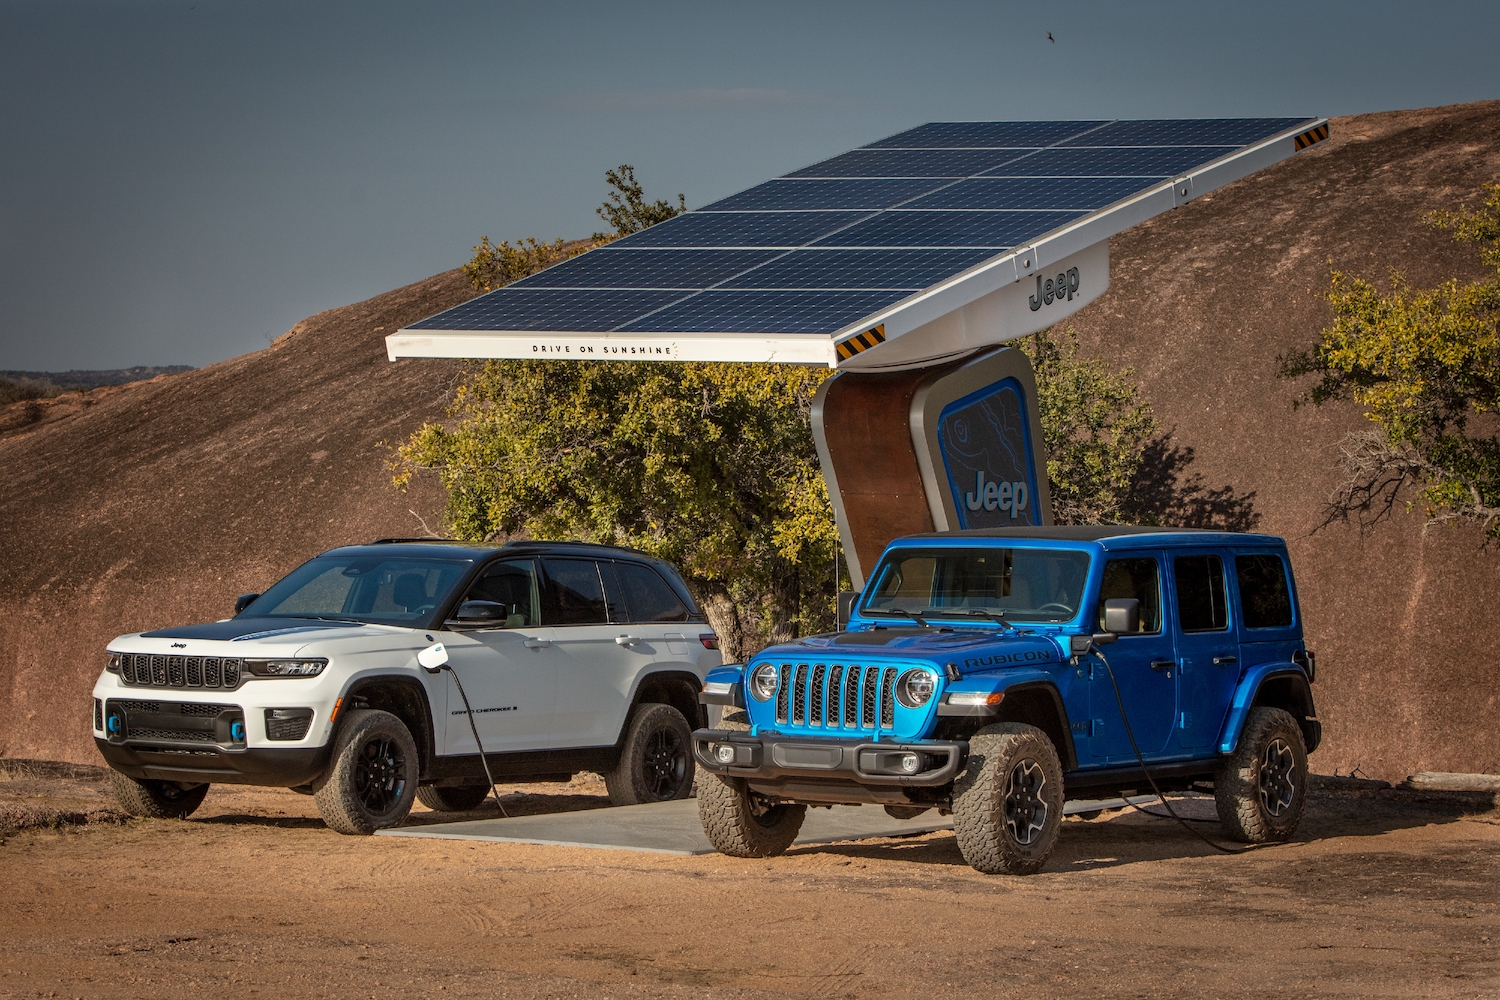 Two Jeep hybrid SUVs plugged into a remote solar panel, shrubs and the desert visible behind them.